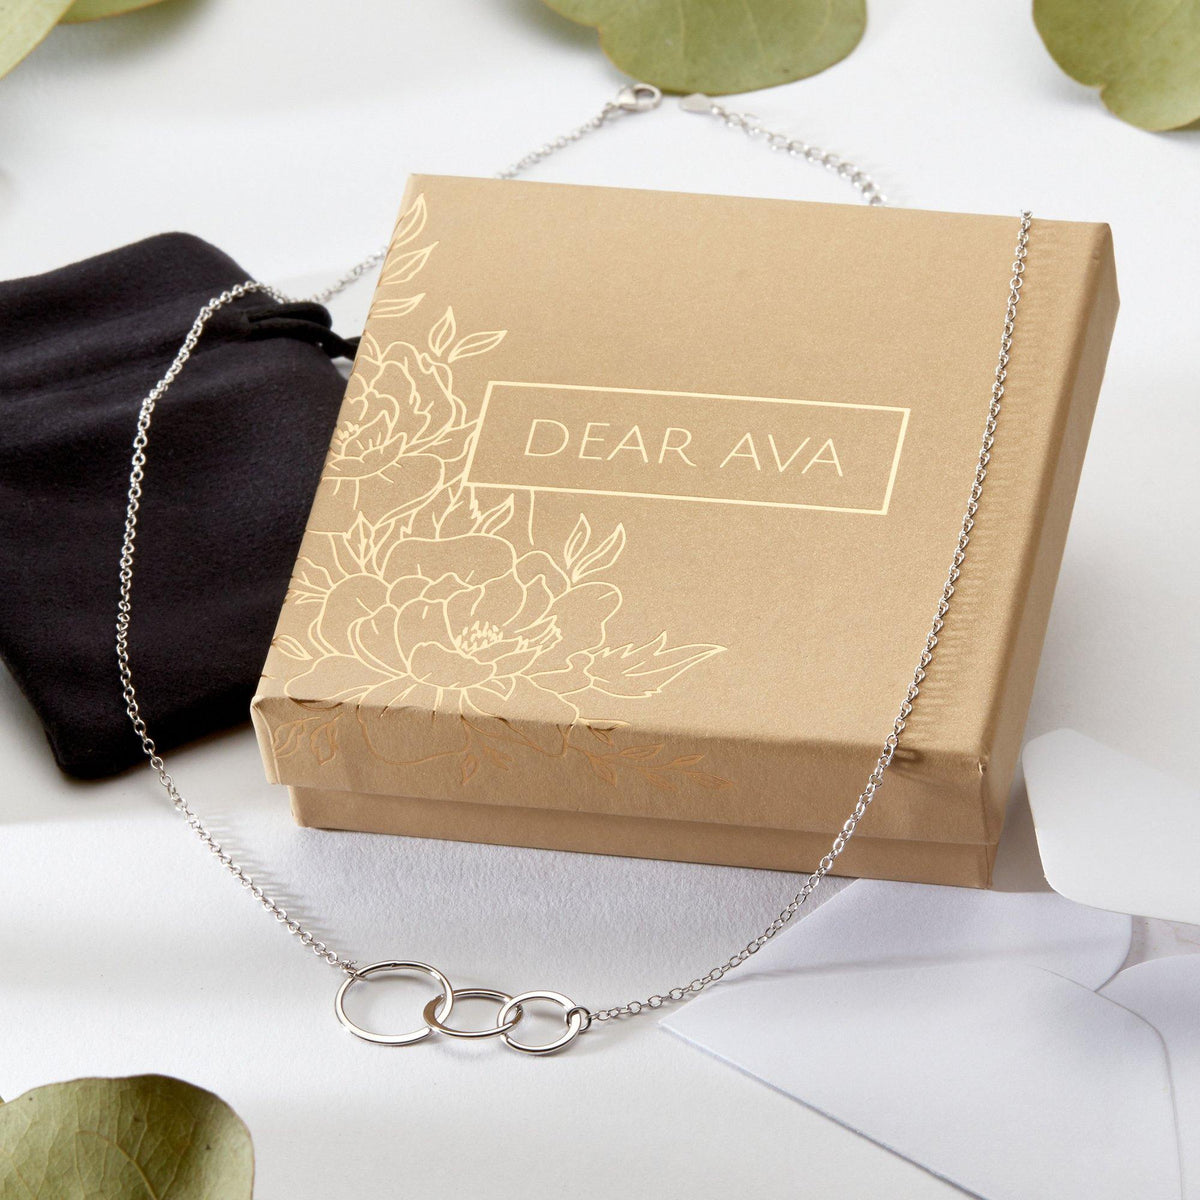 35th Birthday Necklace - Dear Ava, Jewelry / Necklaces / Pendants